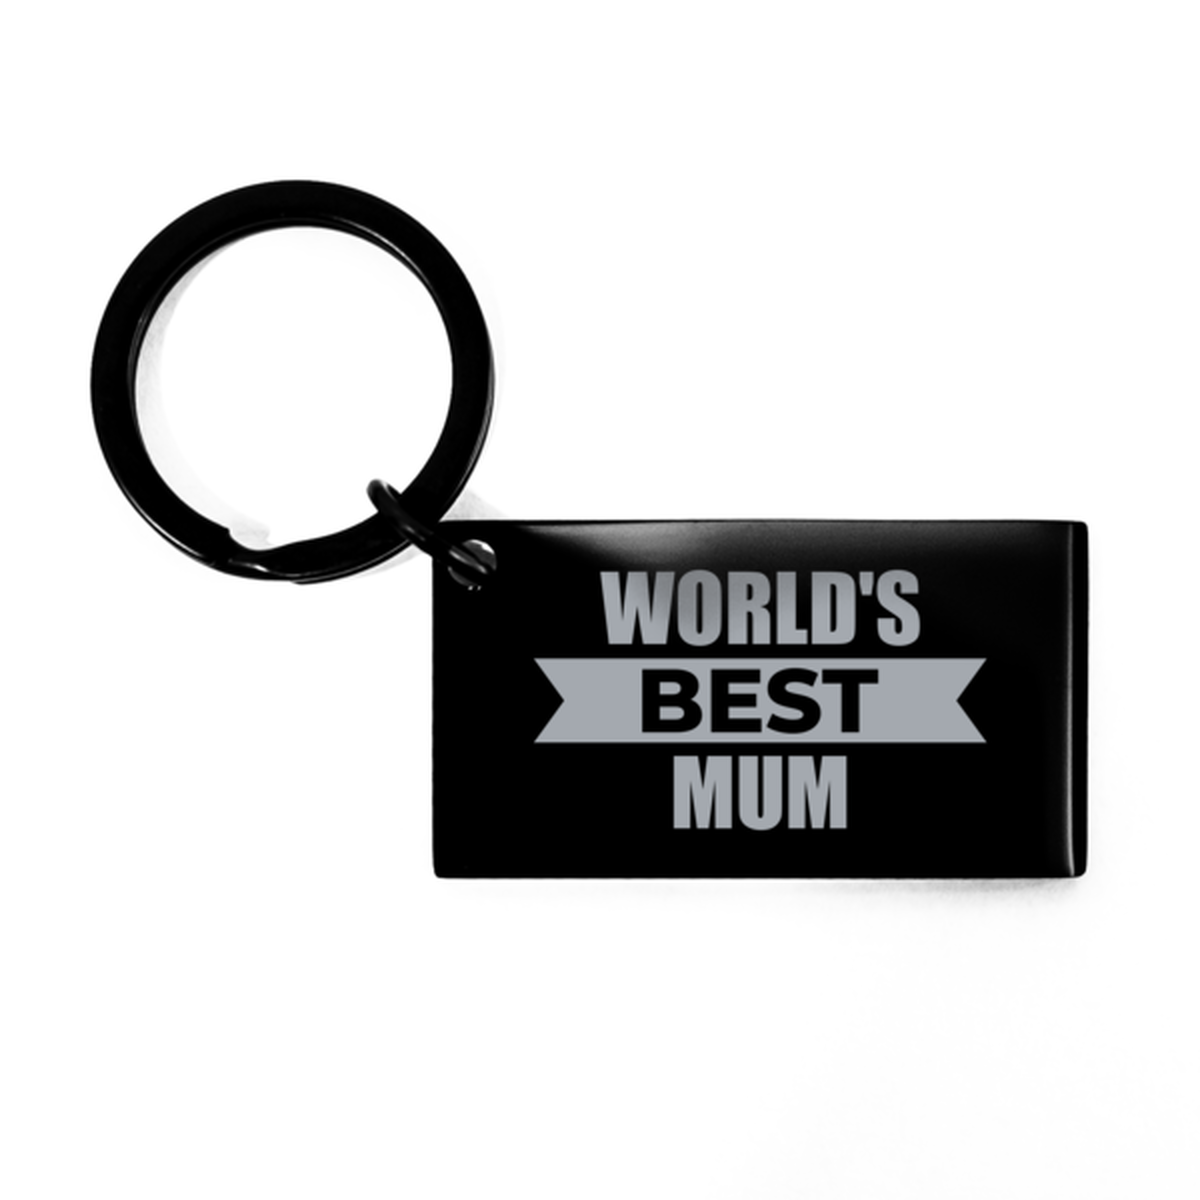 Worlds Best Mum Gifts, Funny Black Engraved Keychain For Mum, Birthday Presents For Women